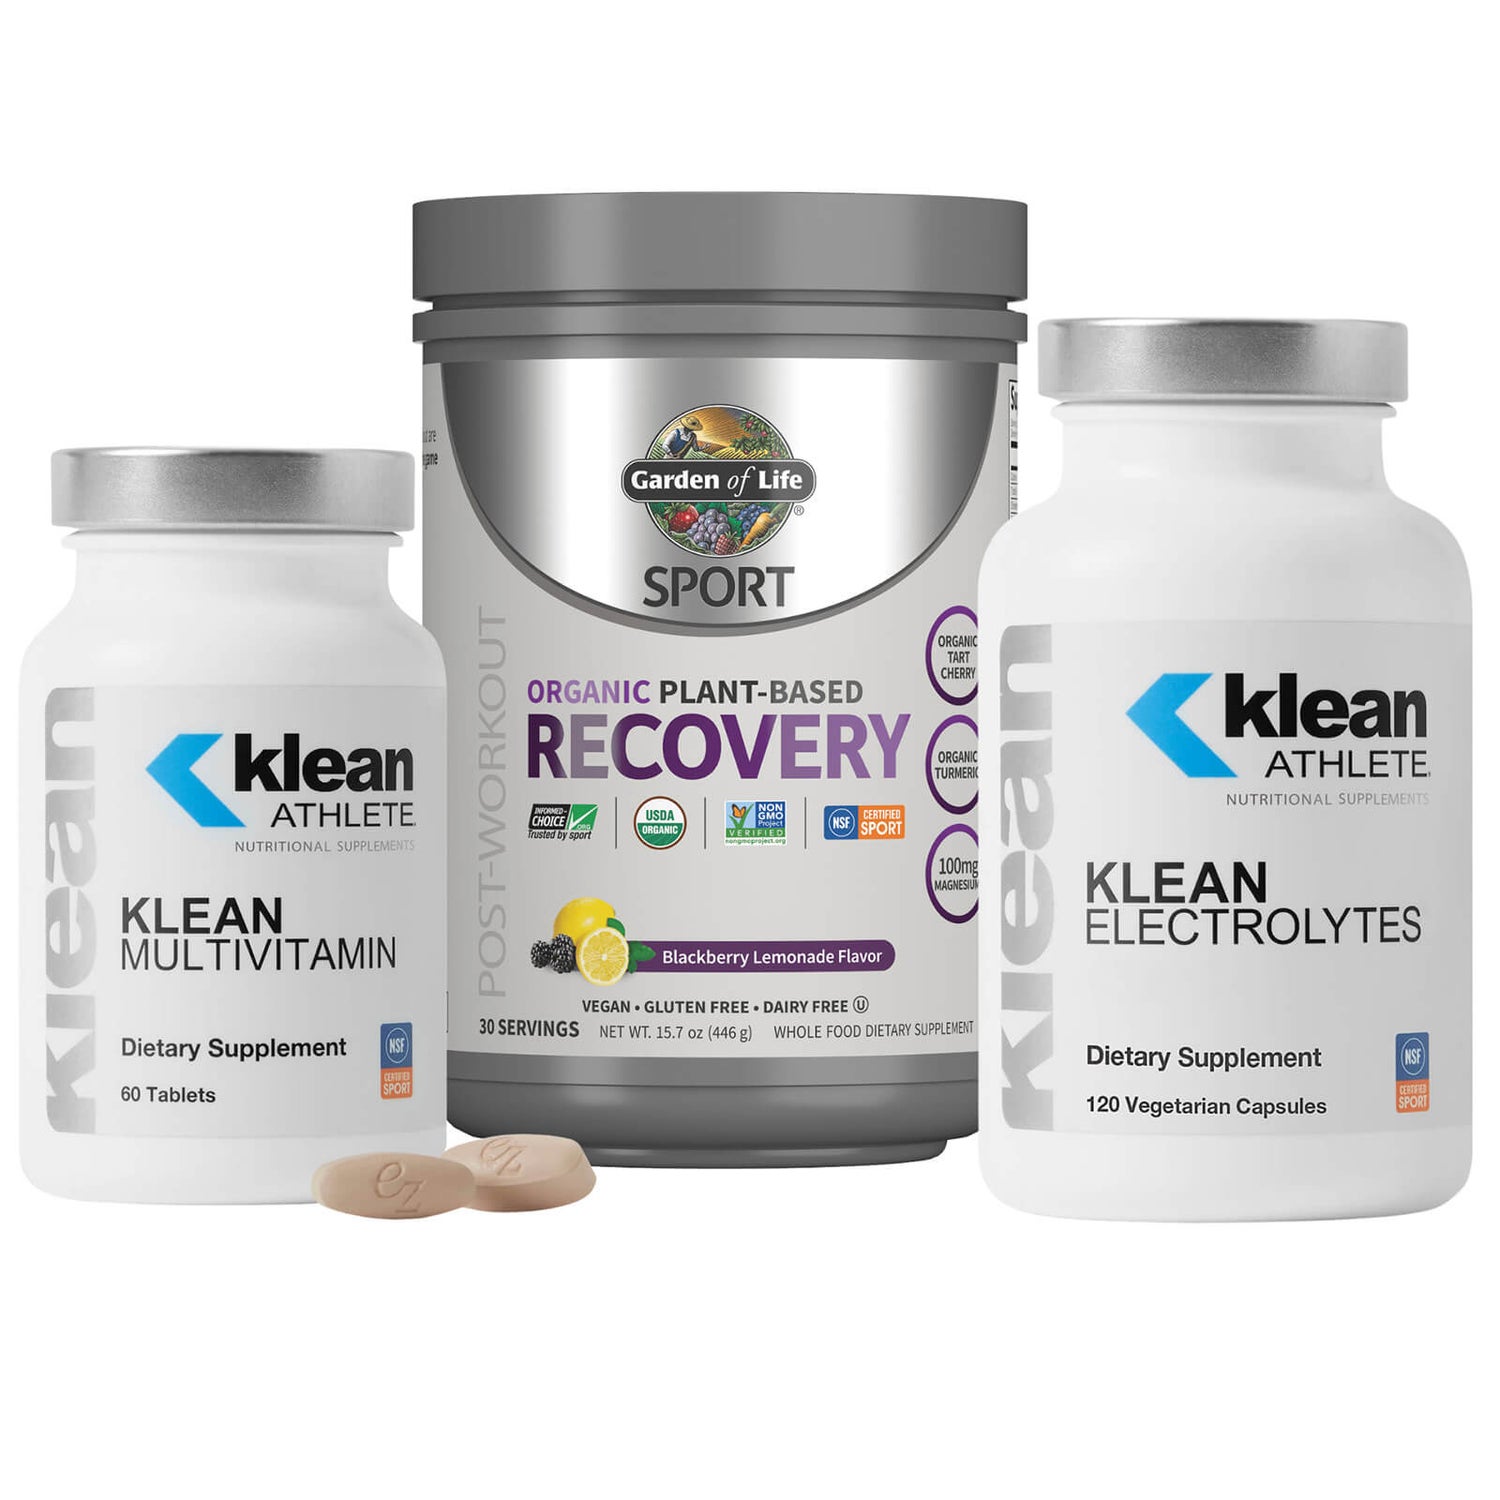 Garden of Life Recovery Fitness Bundle